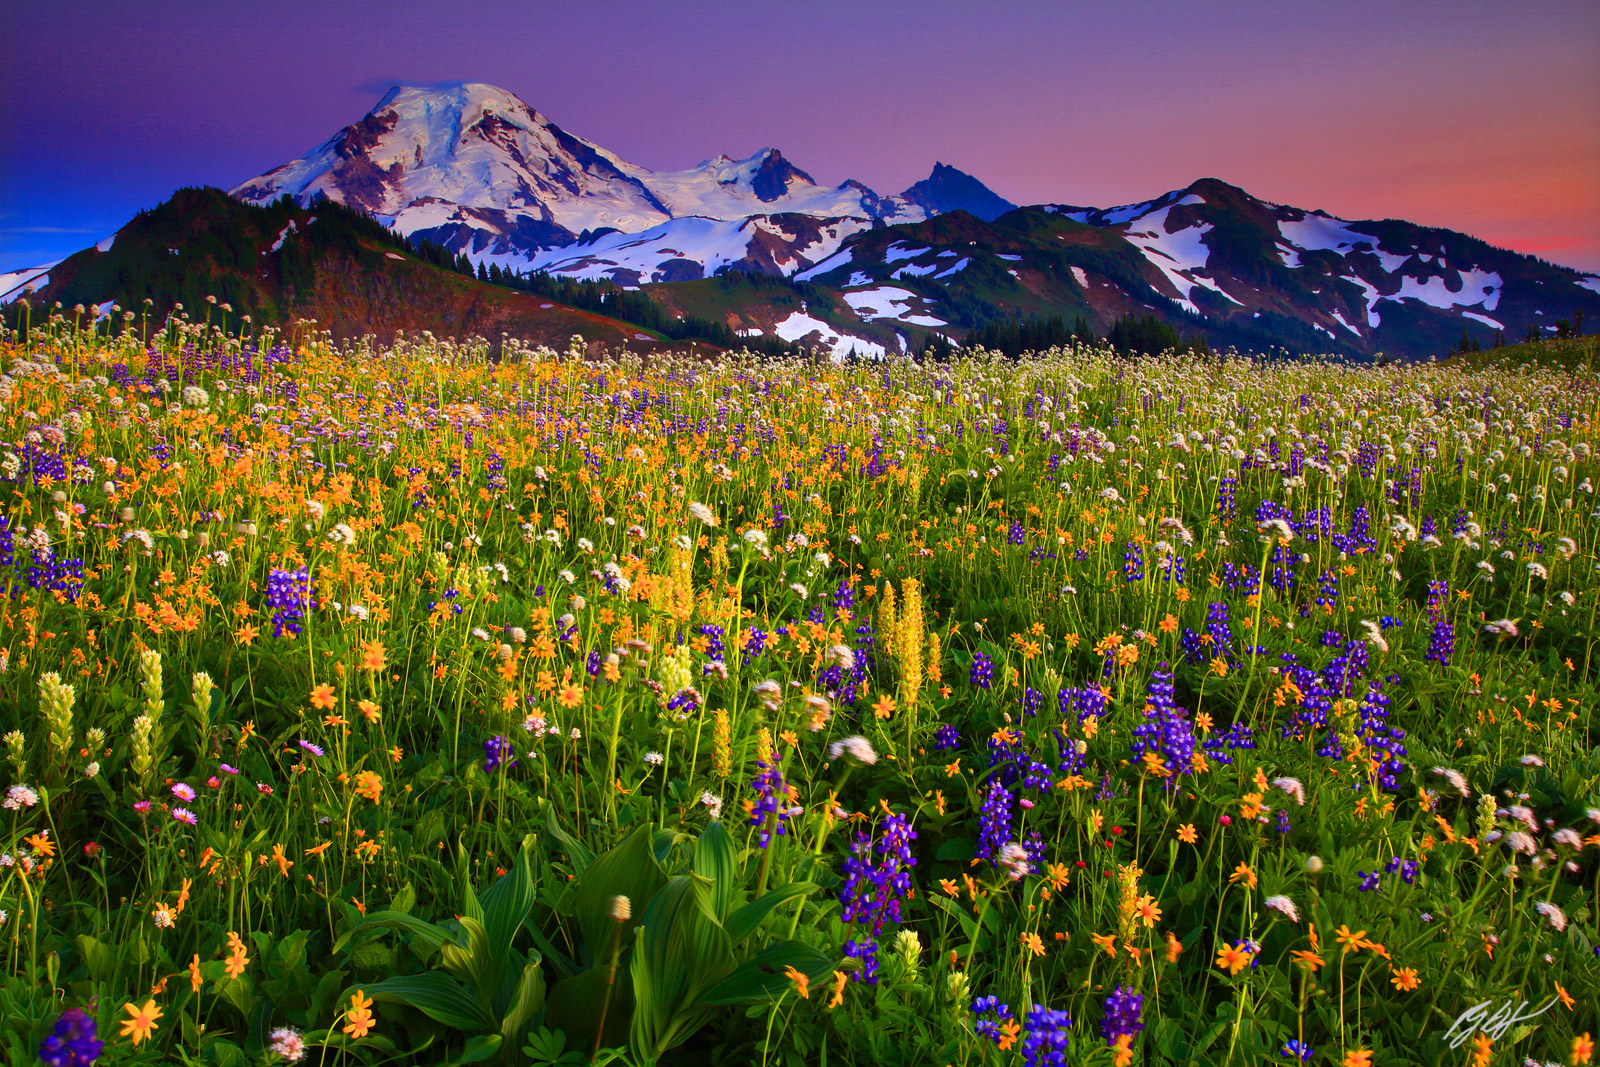 Sunset Alpenglow Wildflowers and Mt Baker from Skyline Divide, Mt Baker Wilderness in Washington